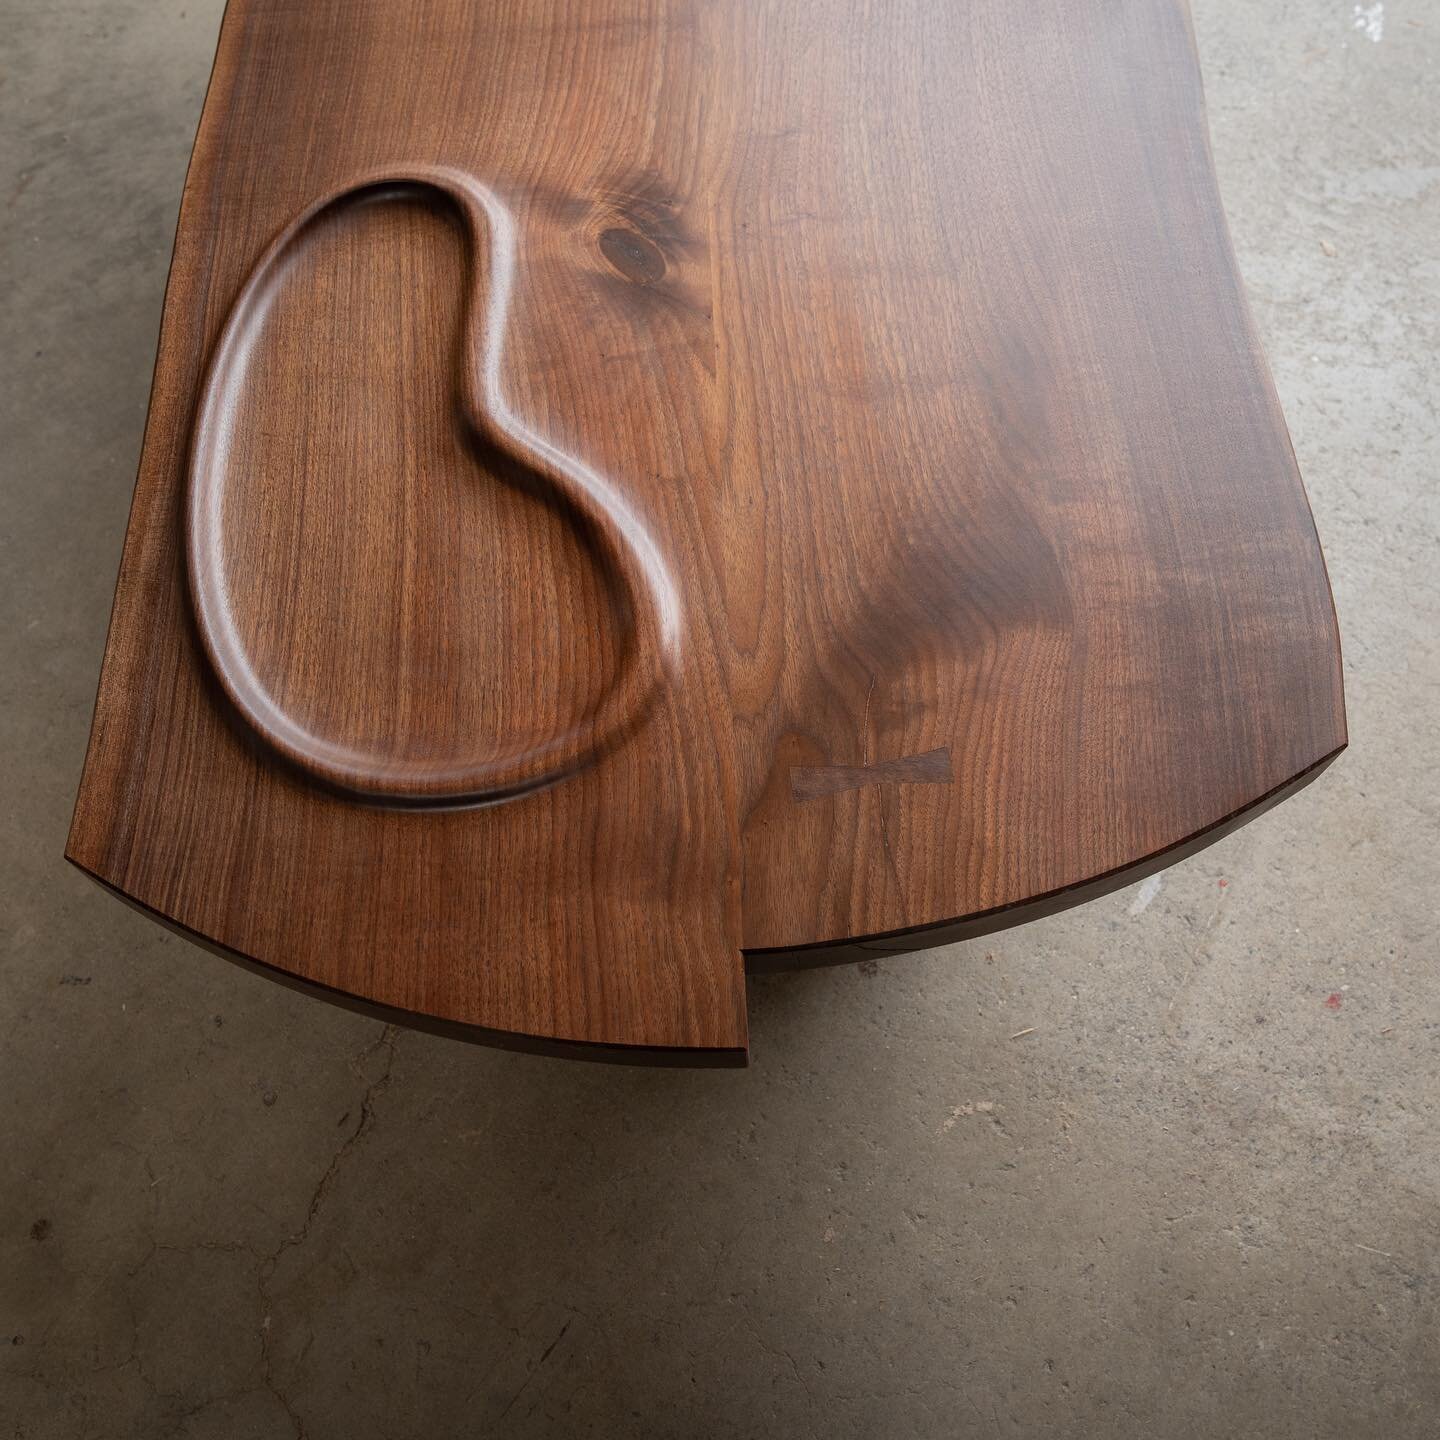 I made the Kidney Coffee table for this year&rsquo;s Utah Design Exhibit. It&rsquo;s a playful and touchable piece. Now on sale through my website 

@utahdesignexhibit #finewoodworking #woodworking #walnut #madeslowtolastlong #handshaped